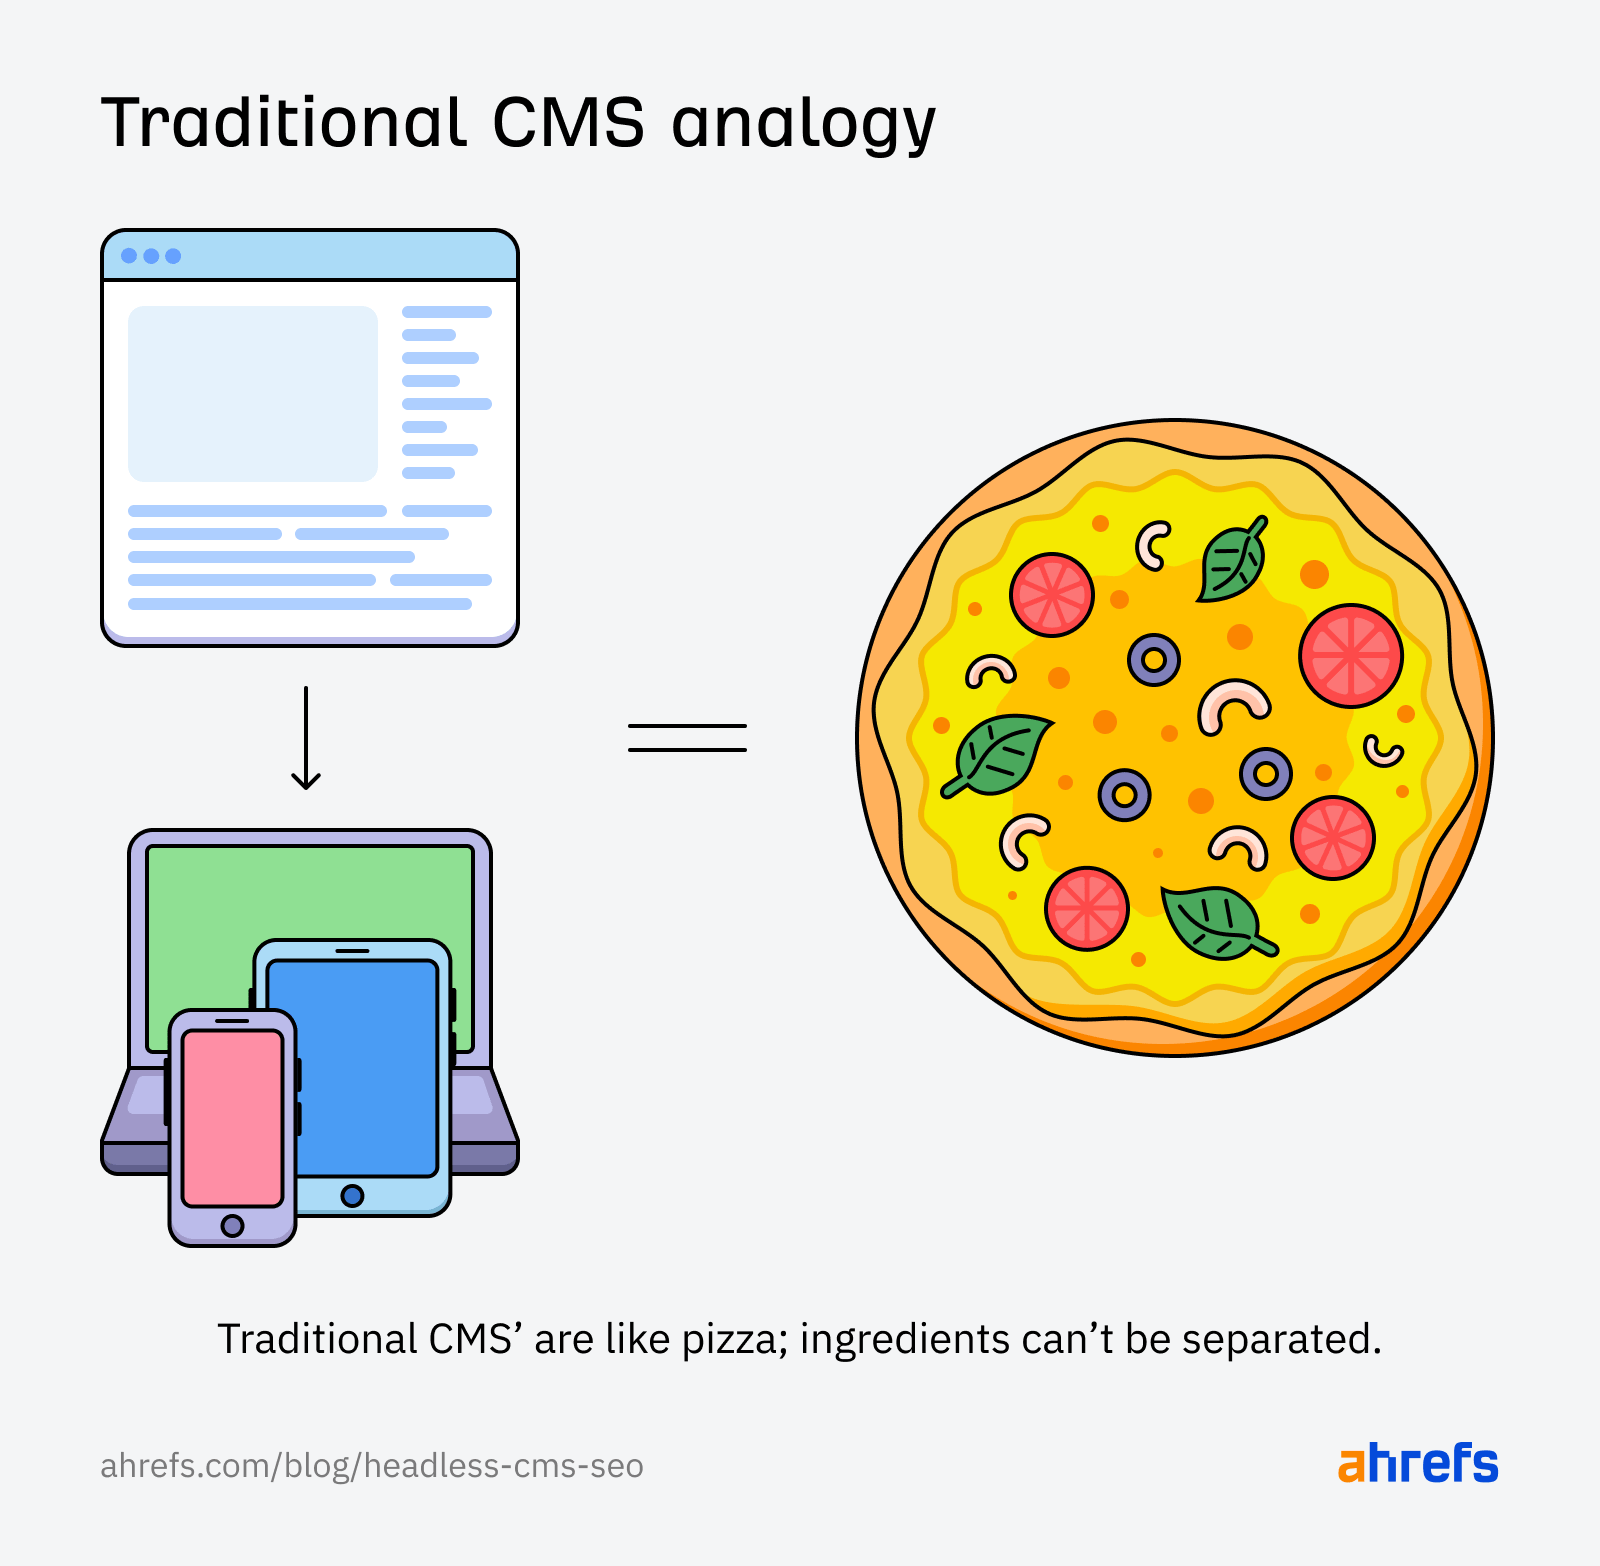 Analogy of how a traditional CMS works